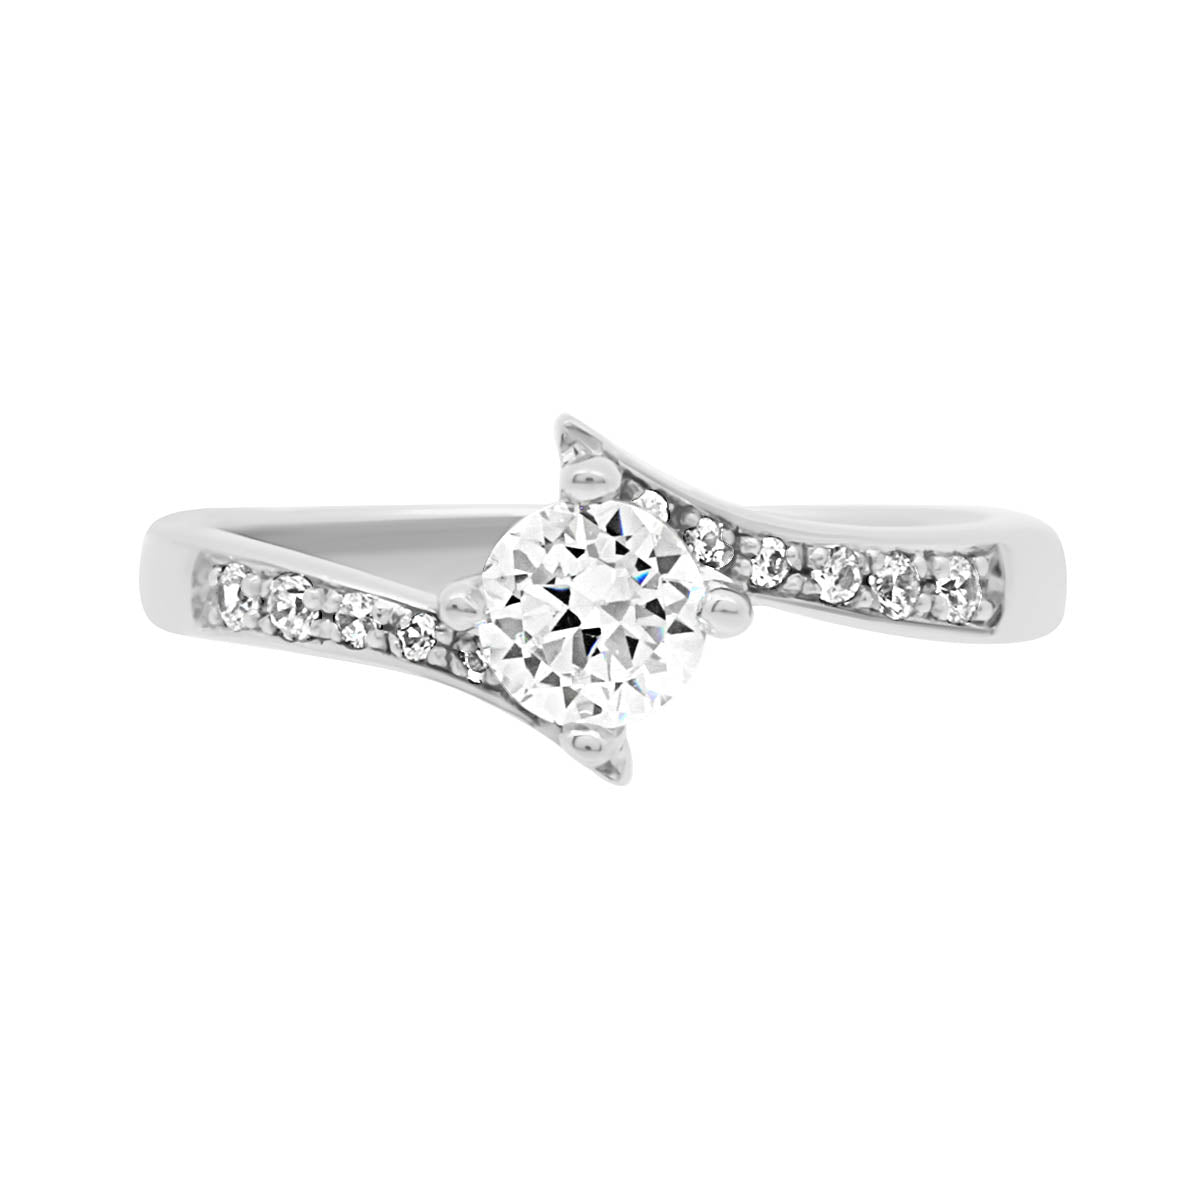 Quirky Diamond Engagement Ring in platinum laying flat